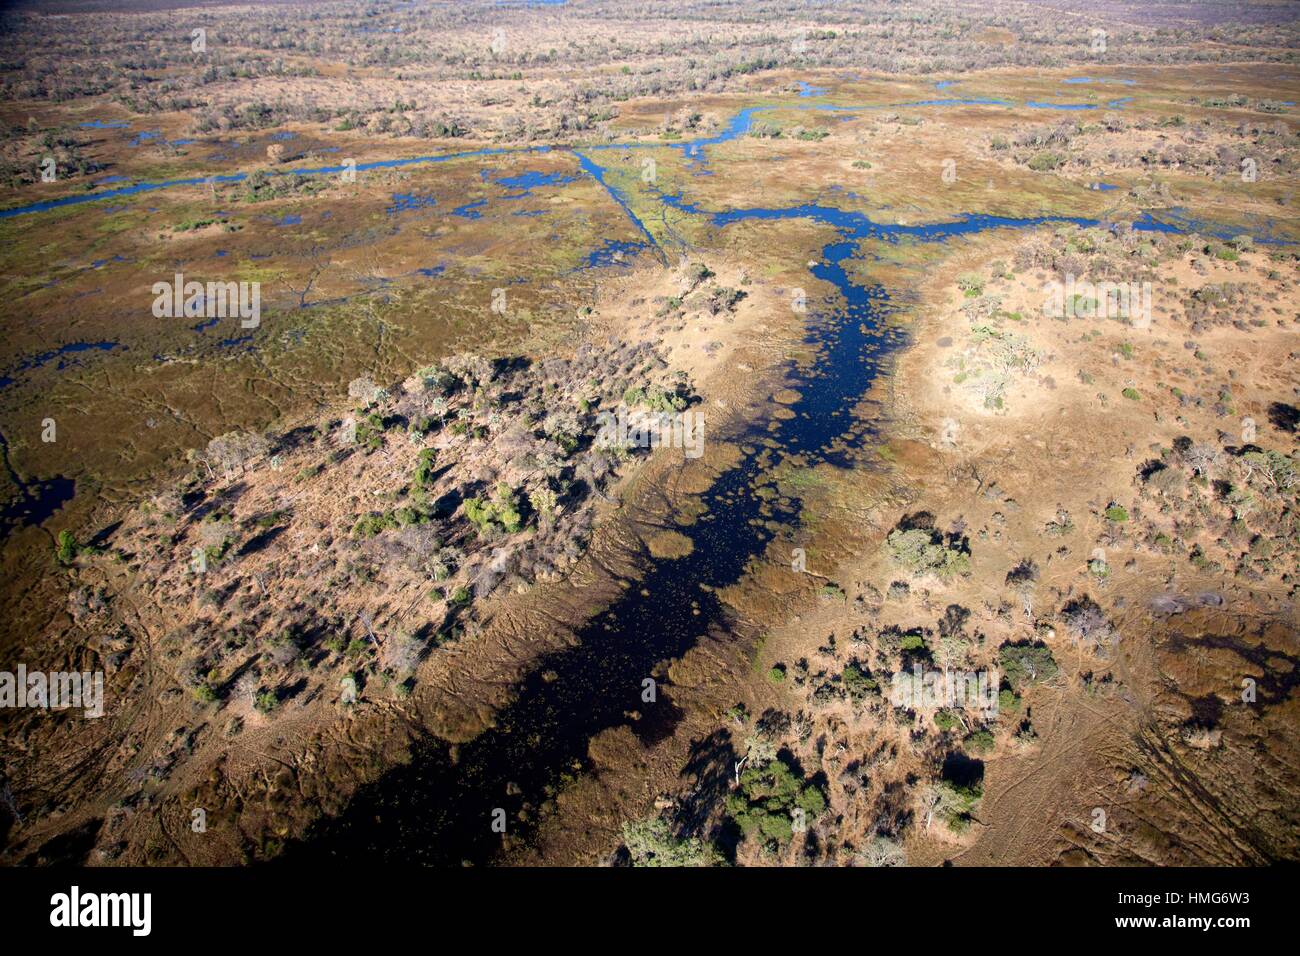 Aerial view of the Okavango Delta, Botswana. The vast inland delta is formed from the Okavango River. This flows into the Delta , creating a Stock Photo